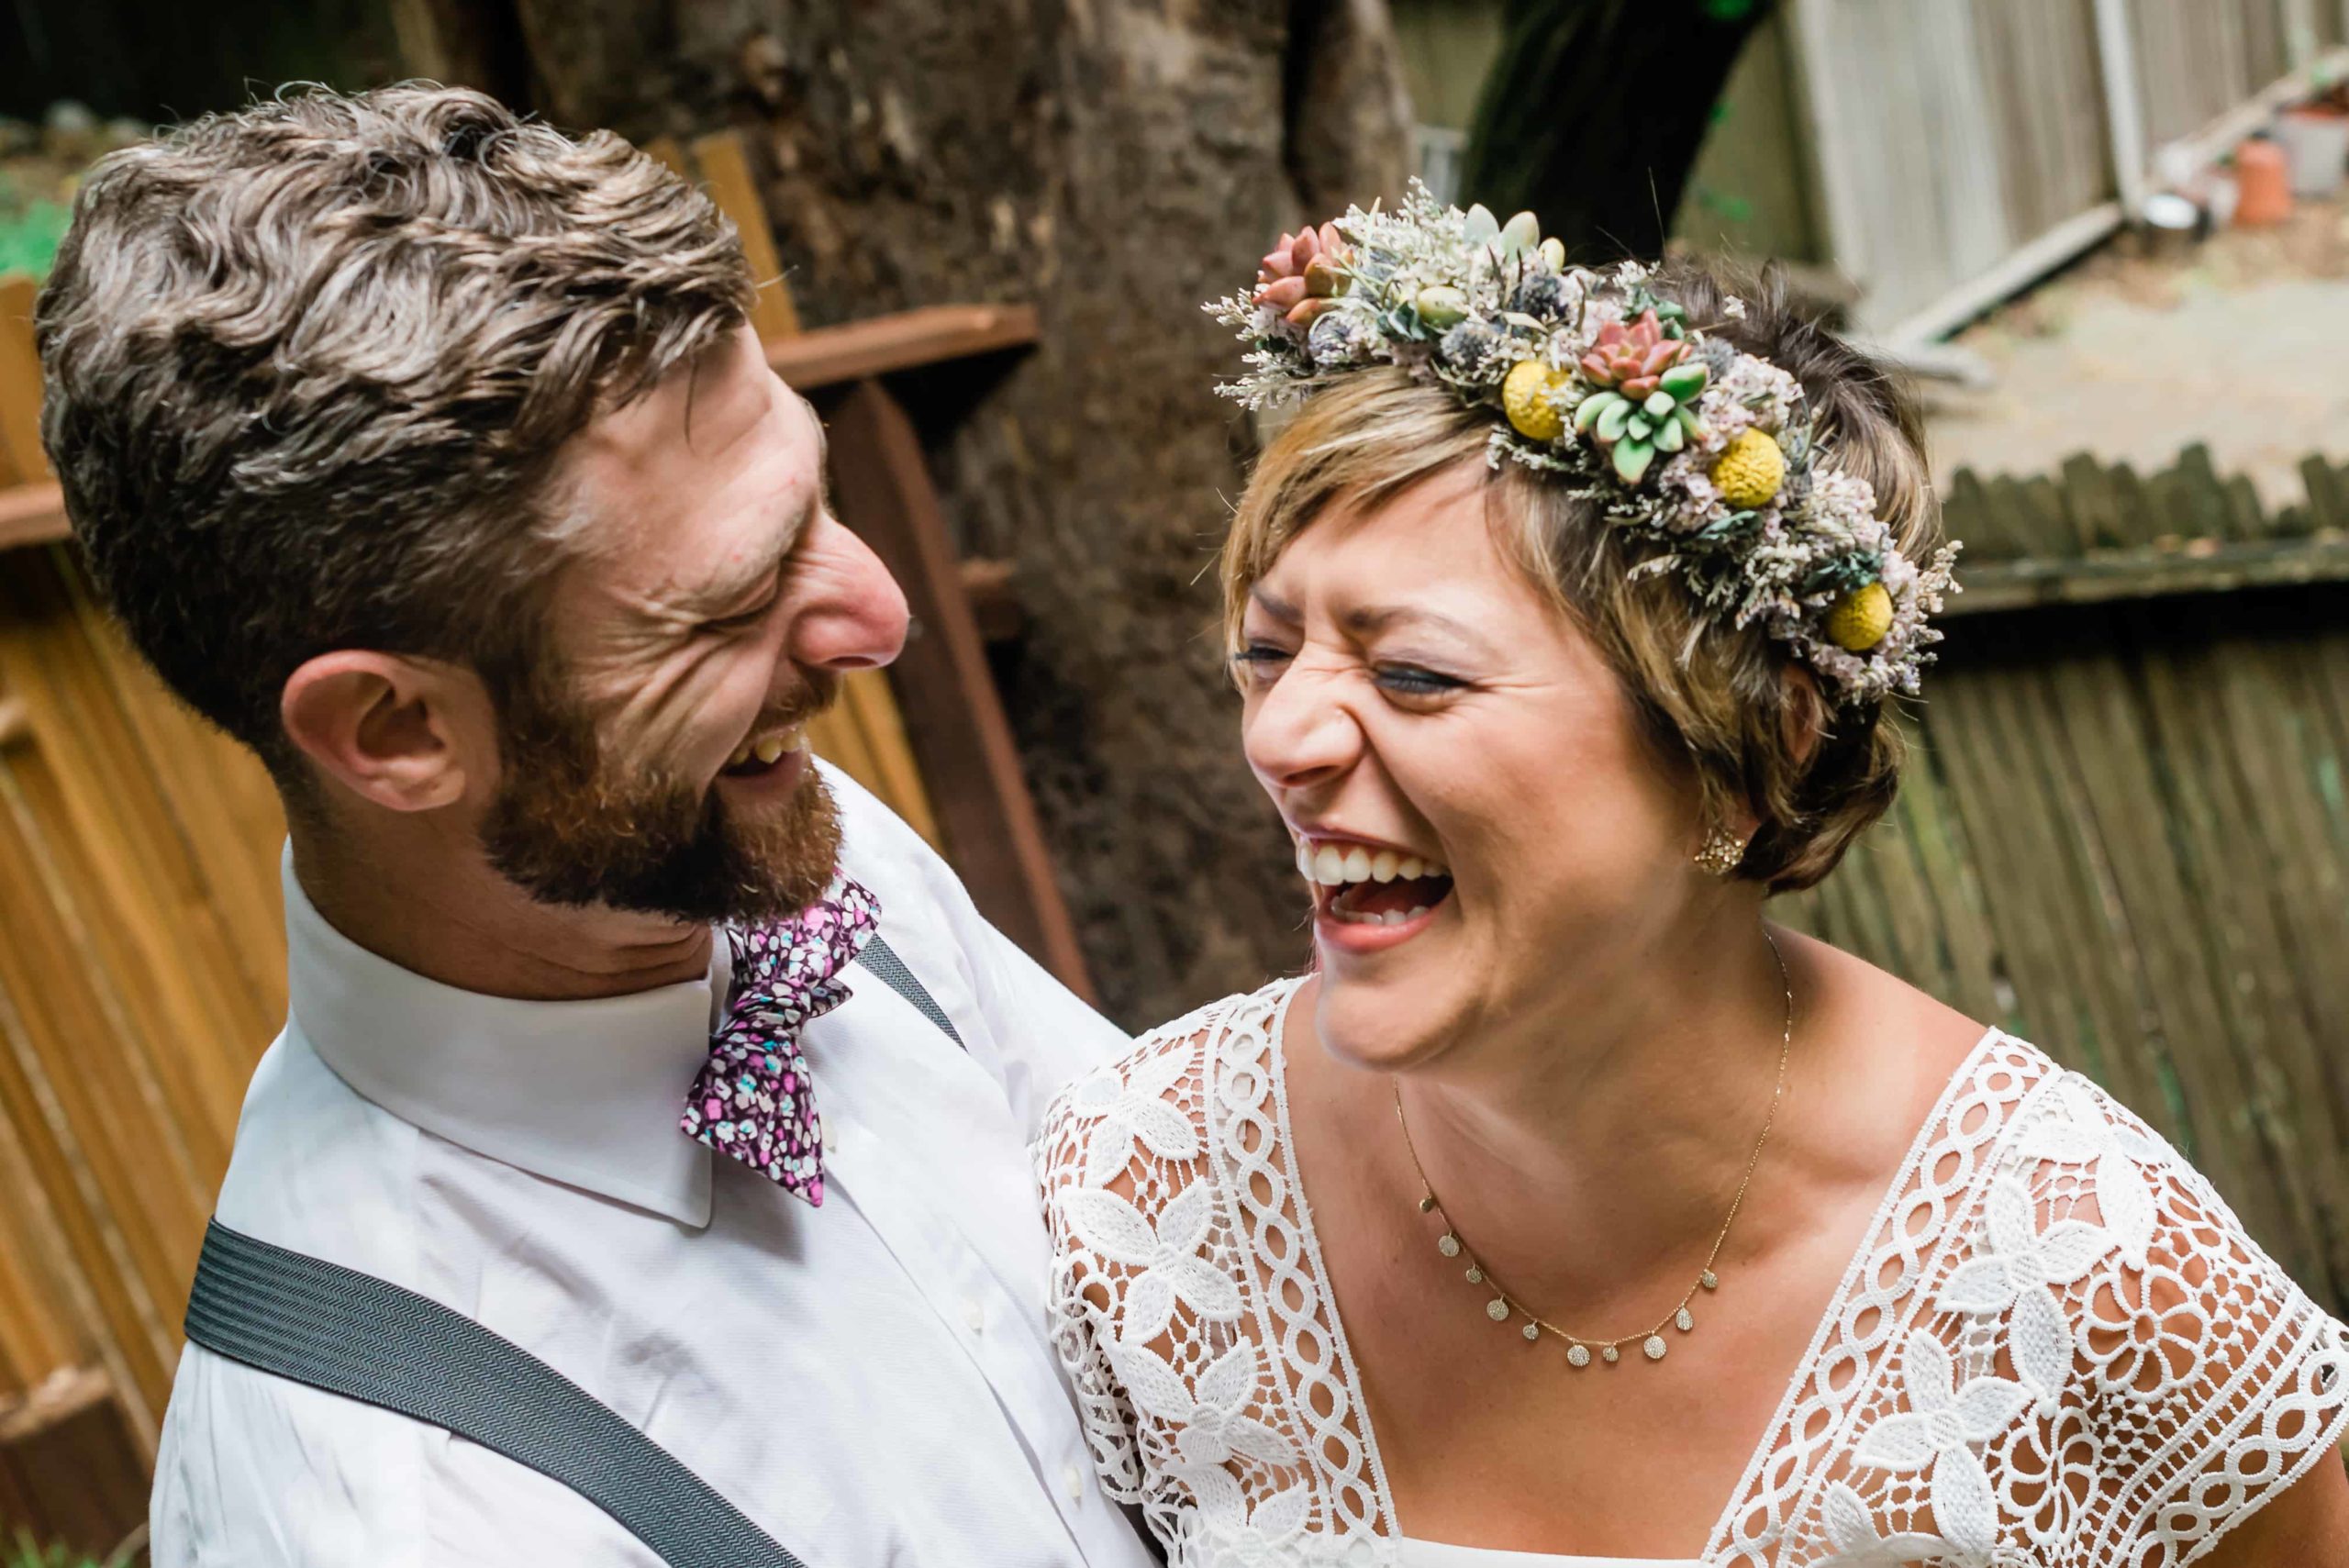 Couple shares a laugh at their elopement; remember, how to tell family you're eloping is totally up to you.